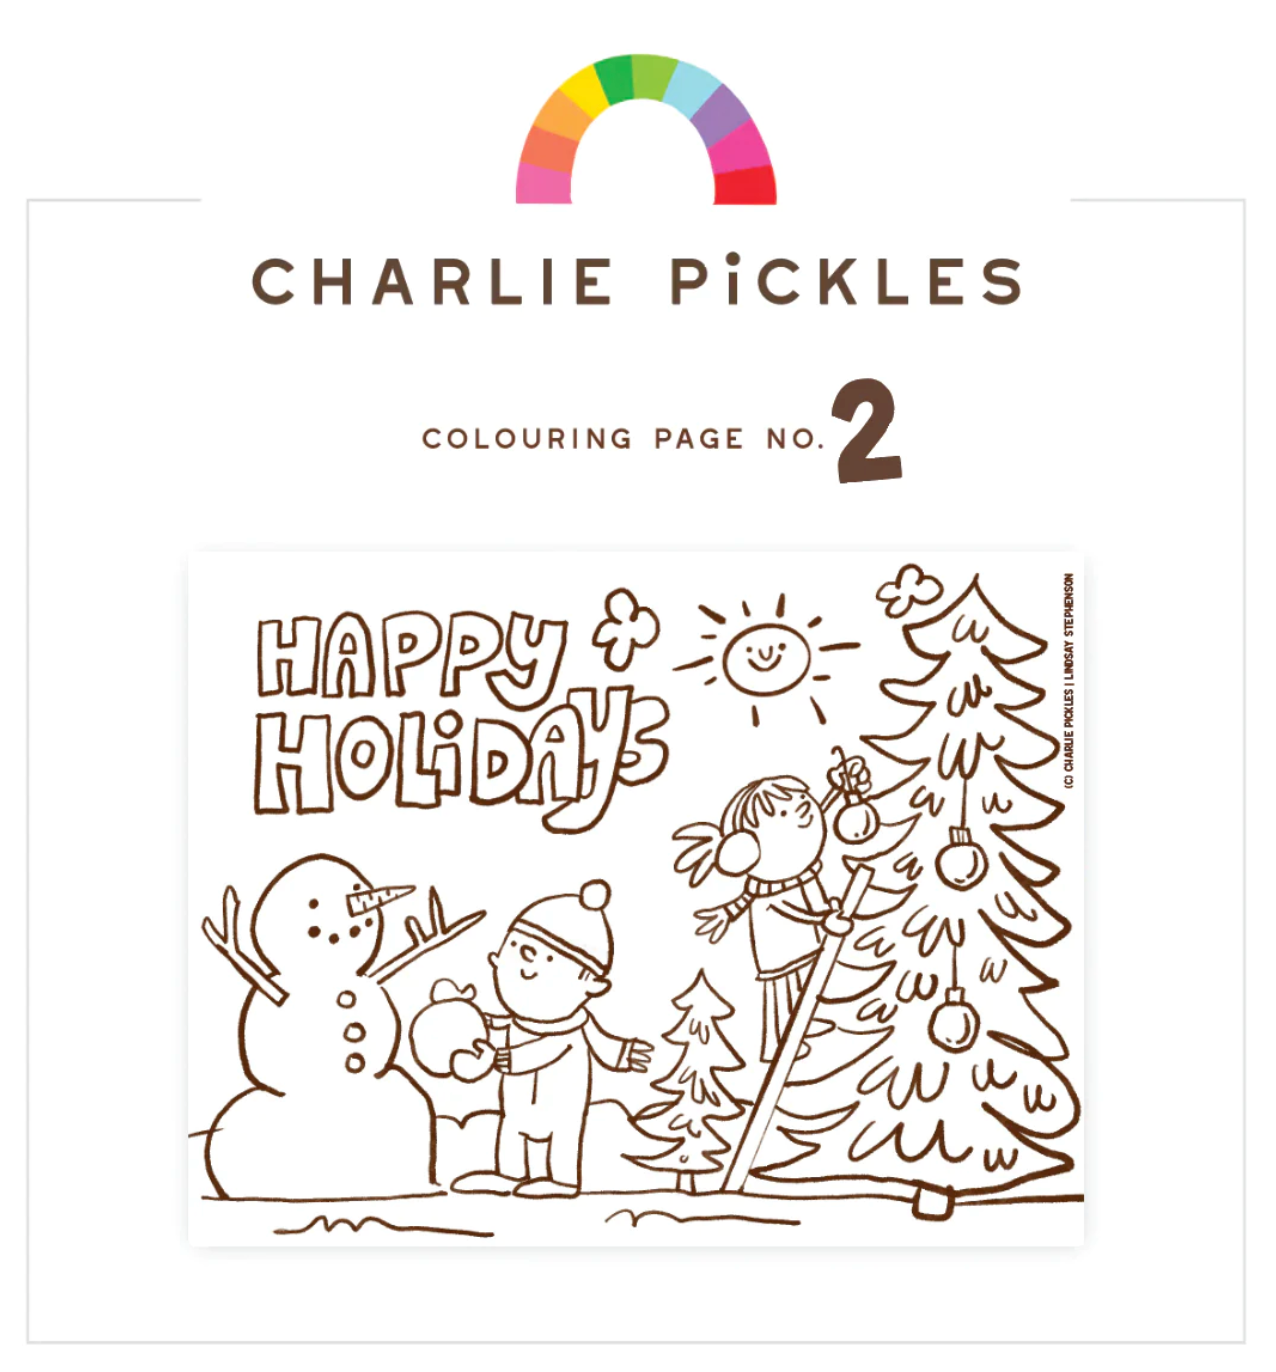 Charlie Pickles Holiday Colouring Page No. 2